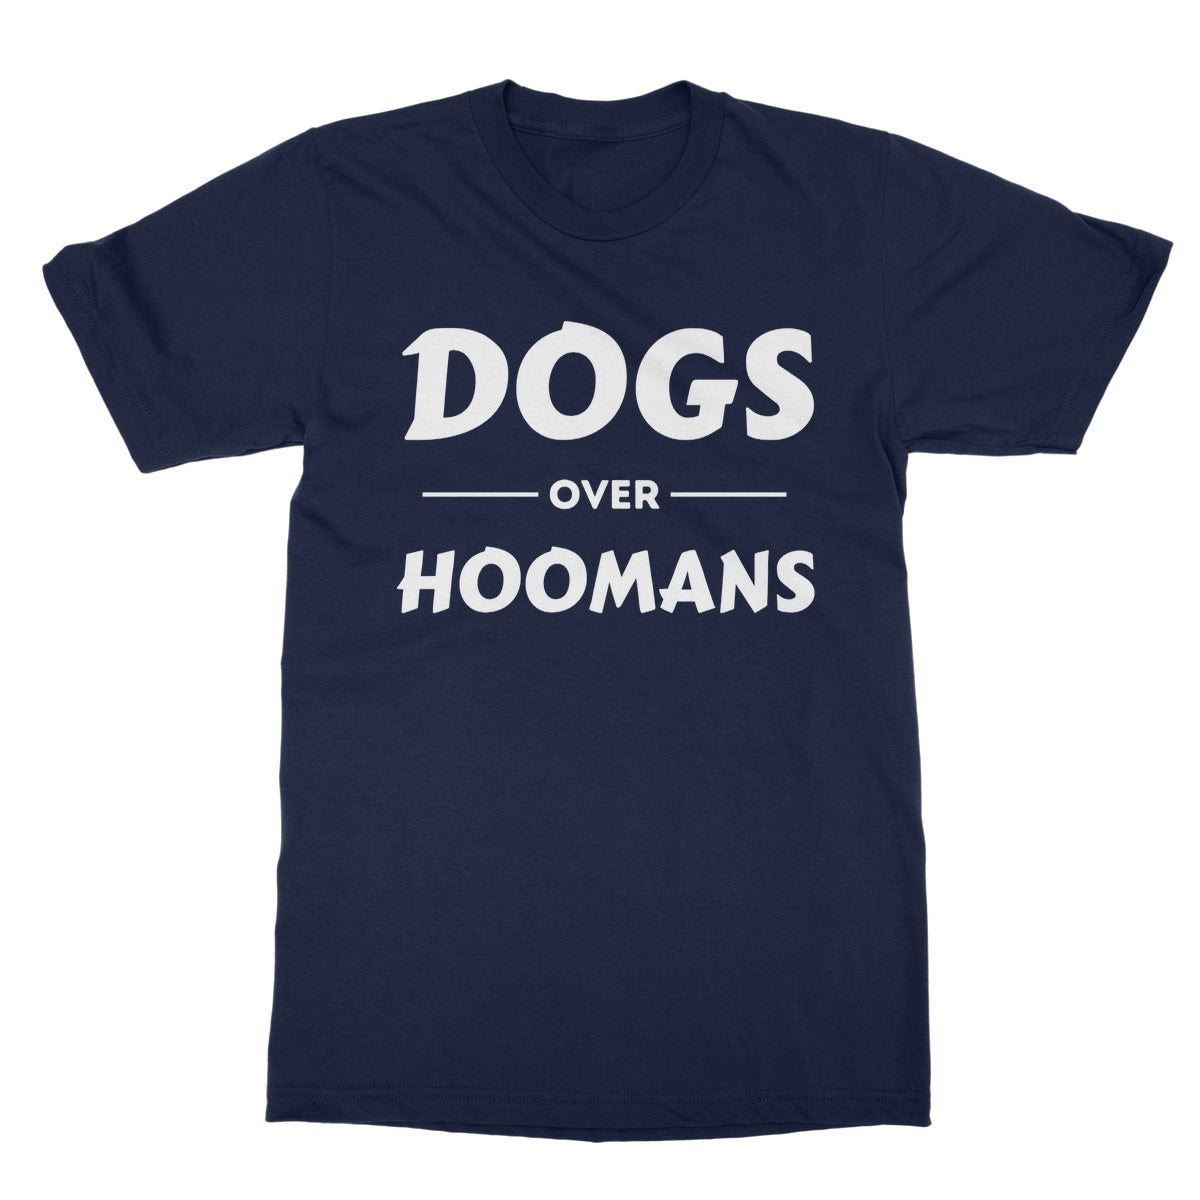 dogs over hoomans t shirt navy